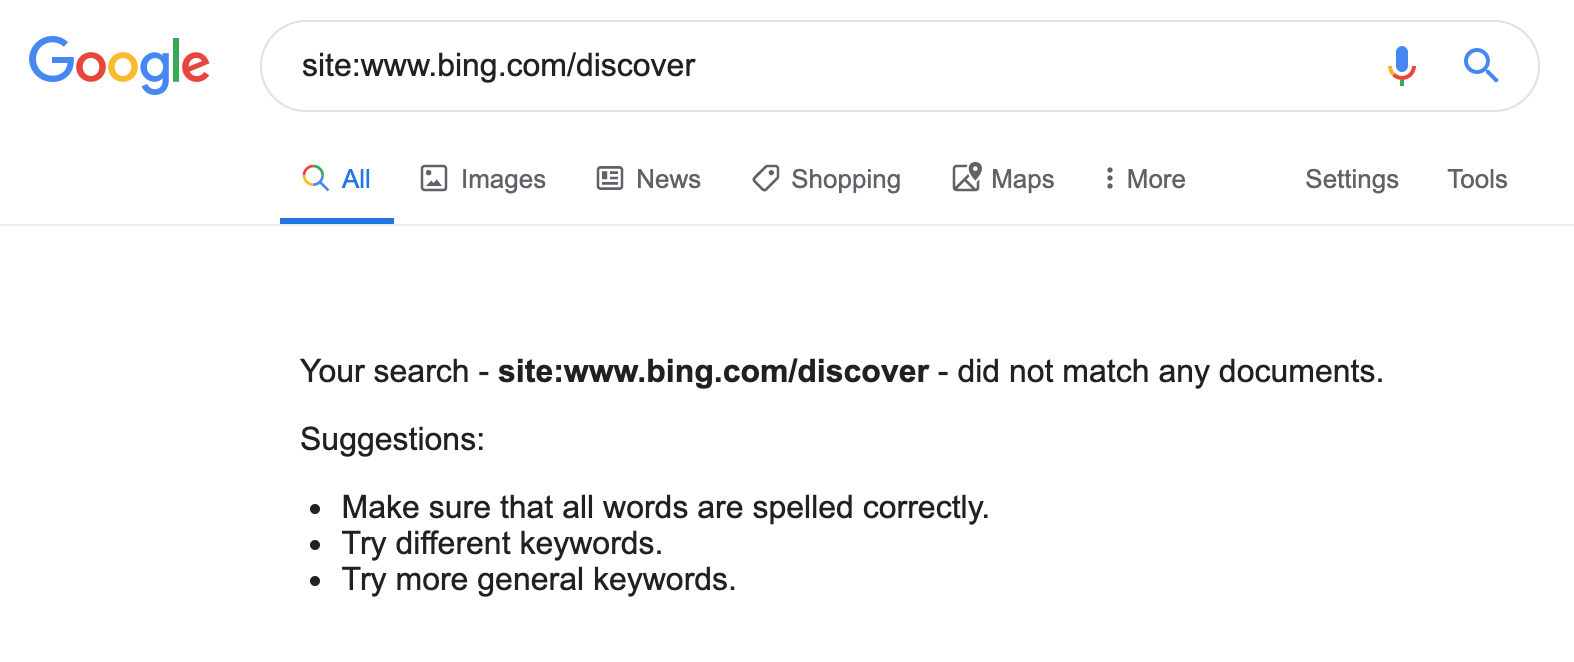 Google Stops Sending Referral Traffic to Bing&#8217;s &#8216;Discover&#8217; Section